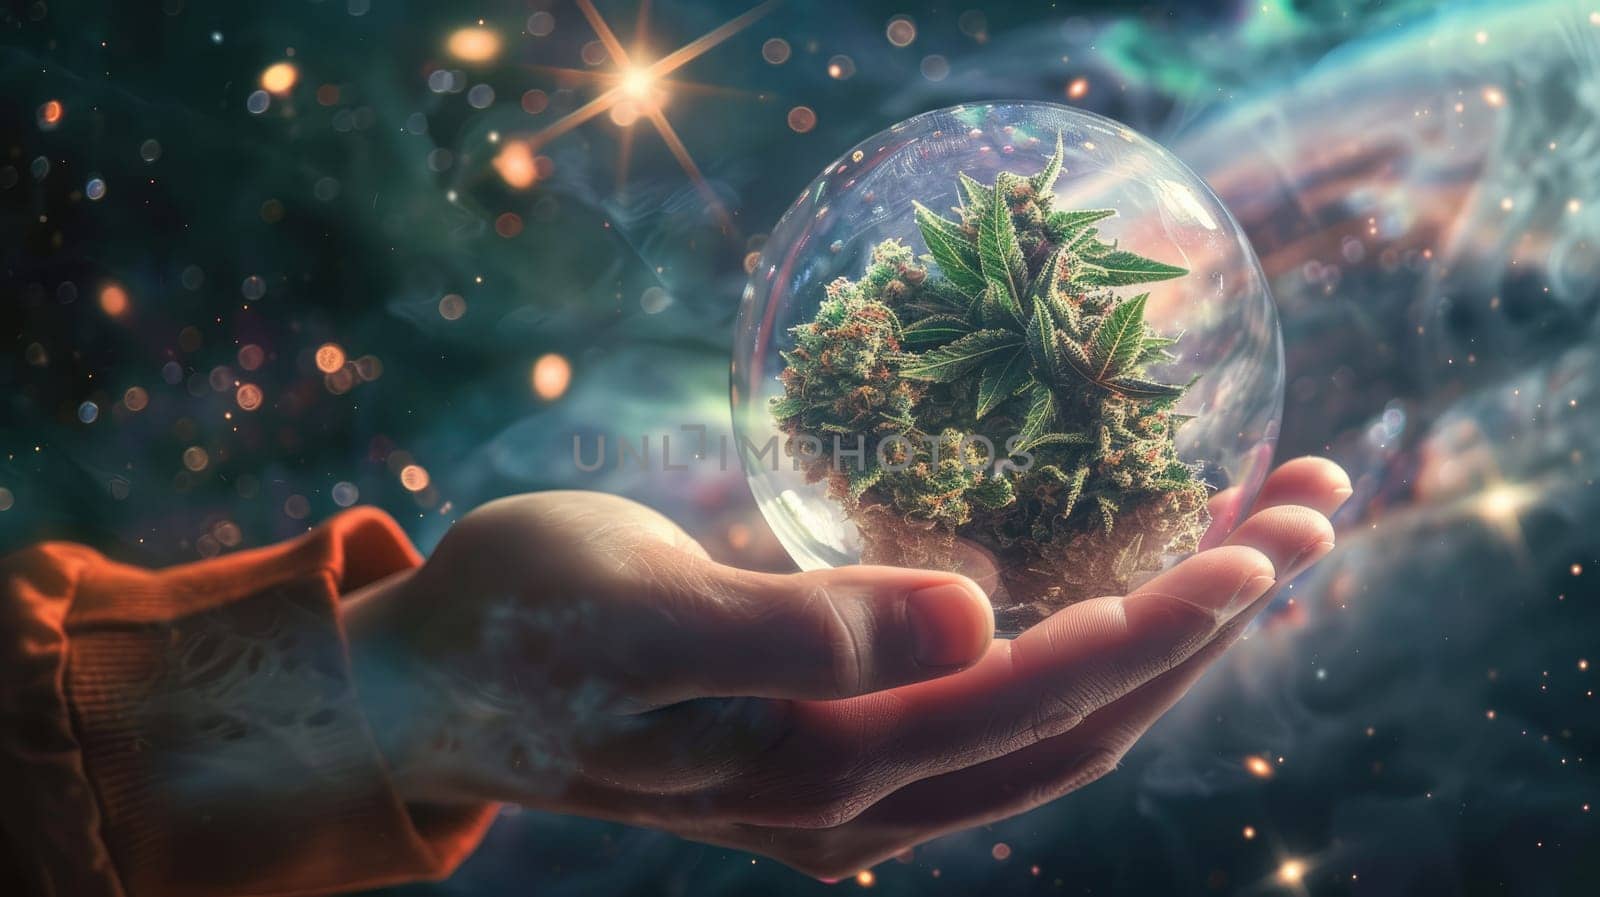 A hand holding a glass with a cannabis in it with galaxy background by nijieimu